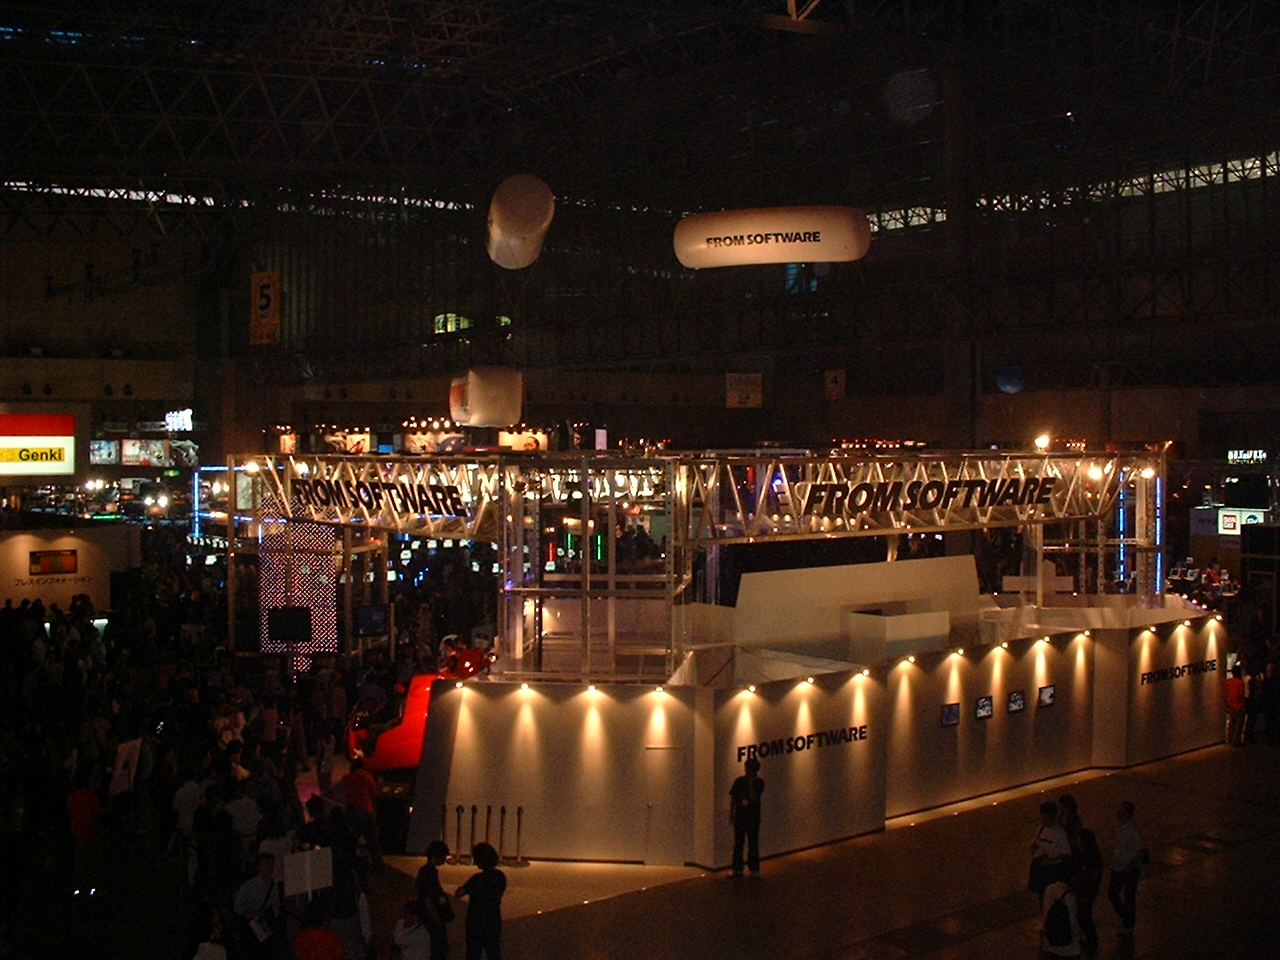 a wide shot of the convention booths with several balloons with logos on them